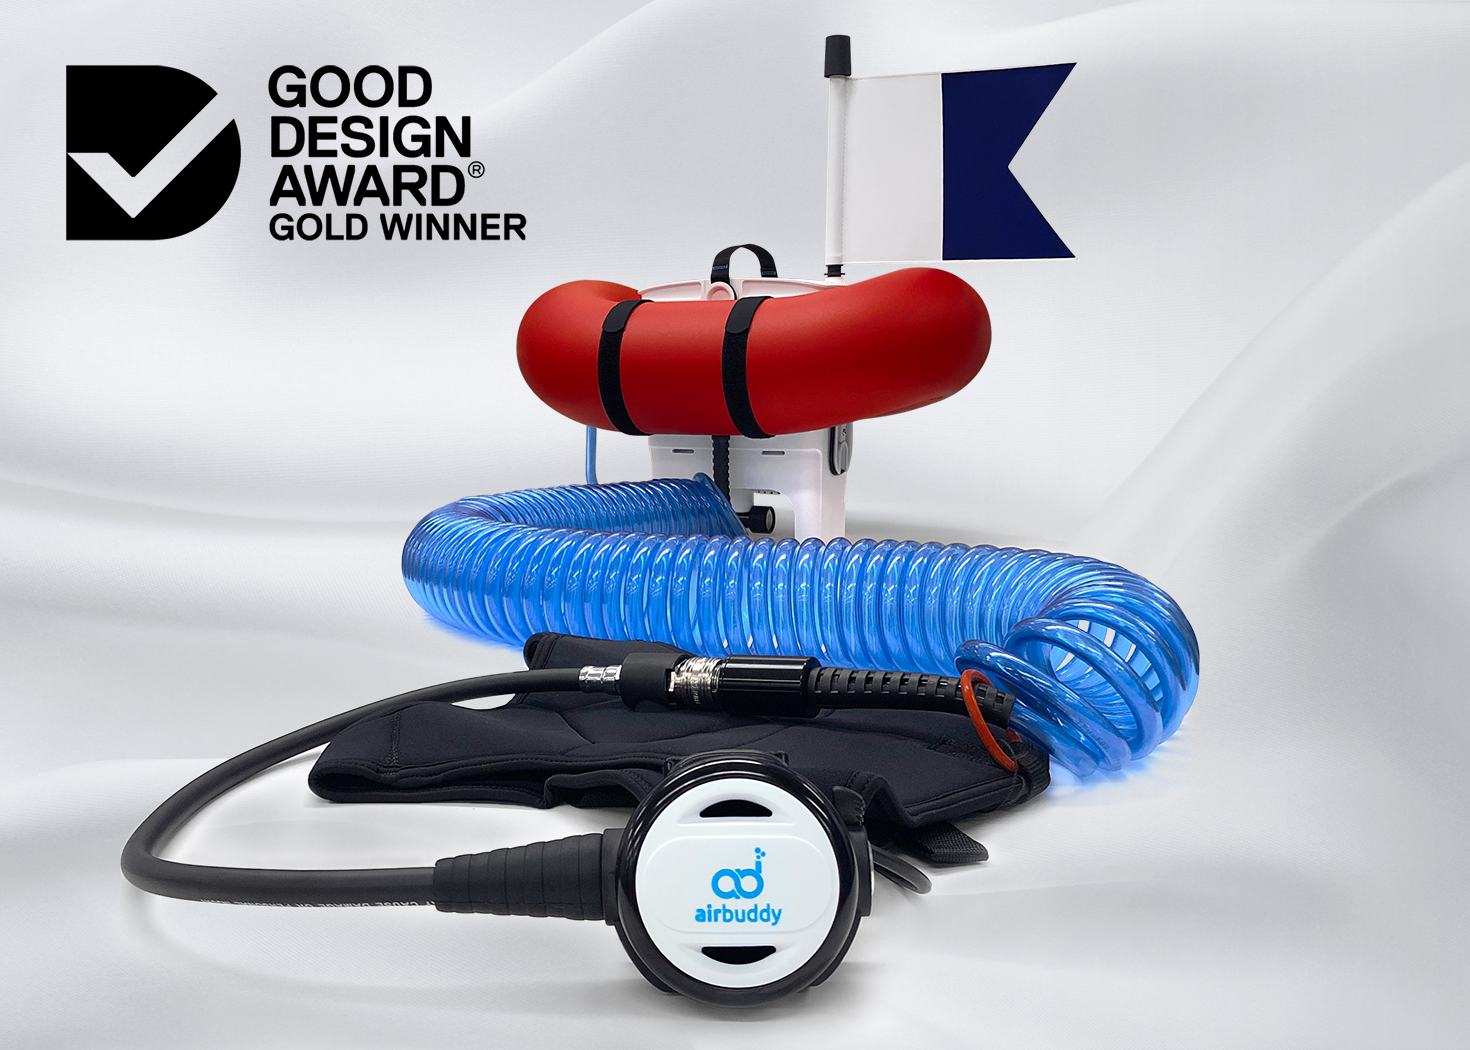 Air Buddy product shot for the Good Design Awards